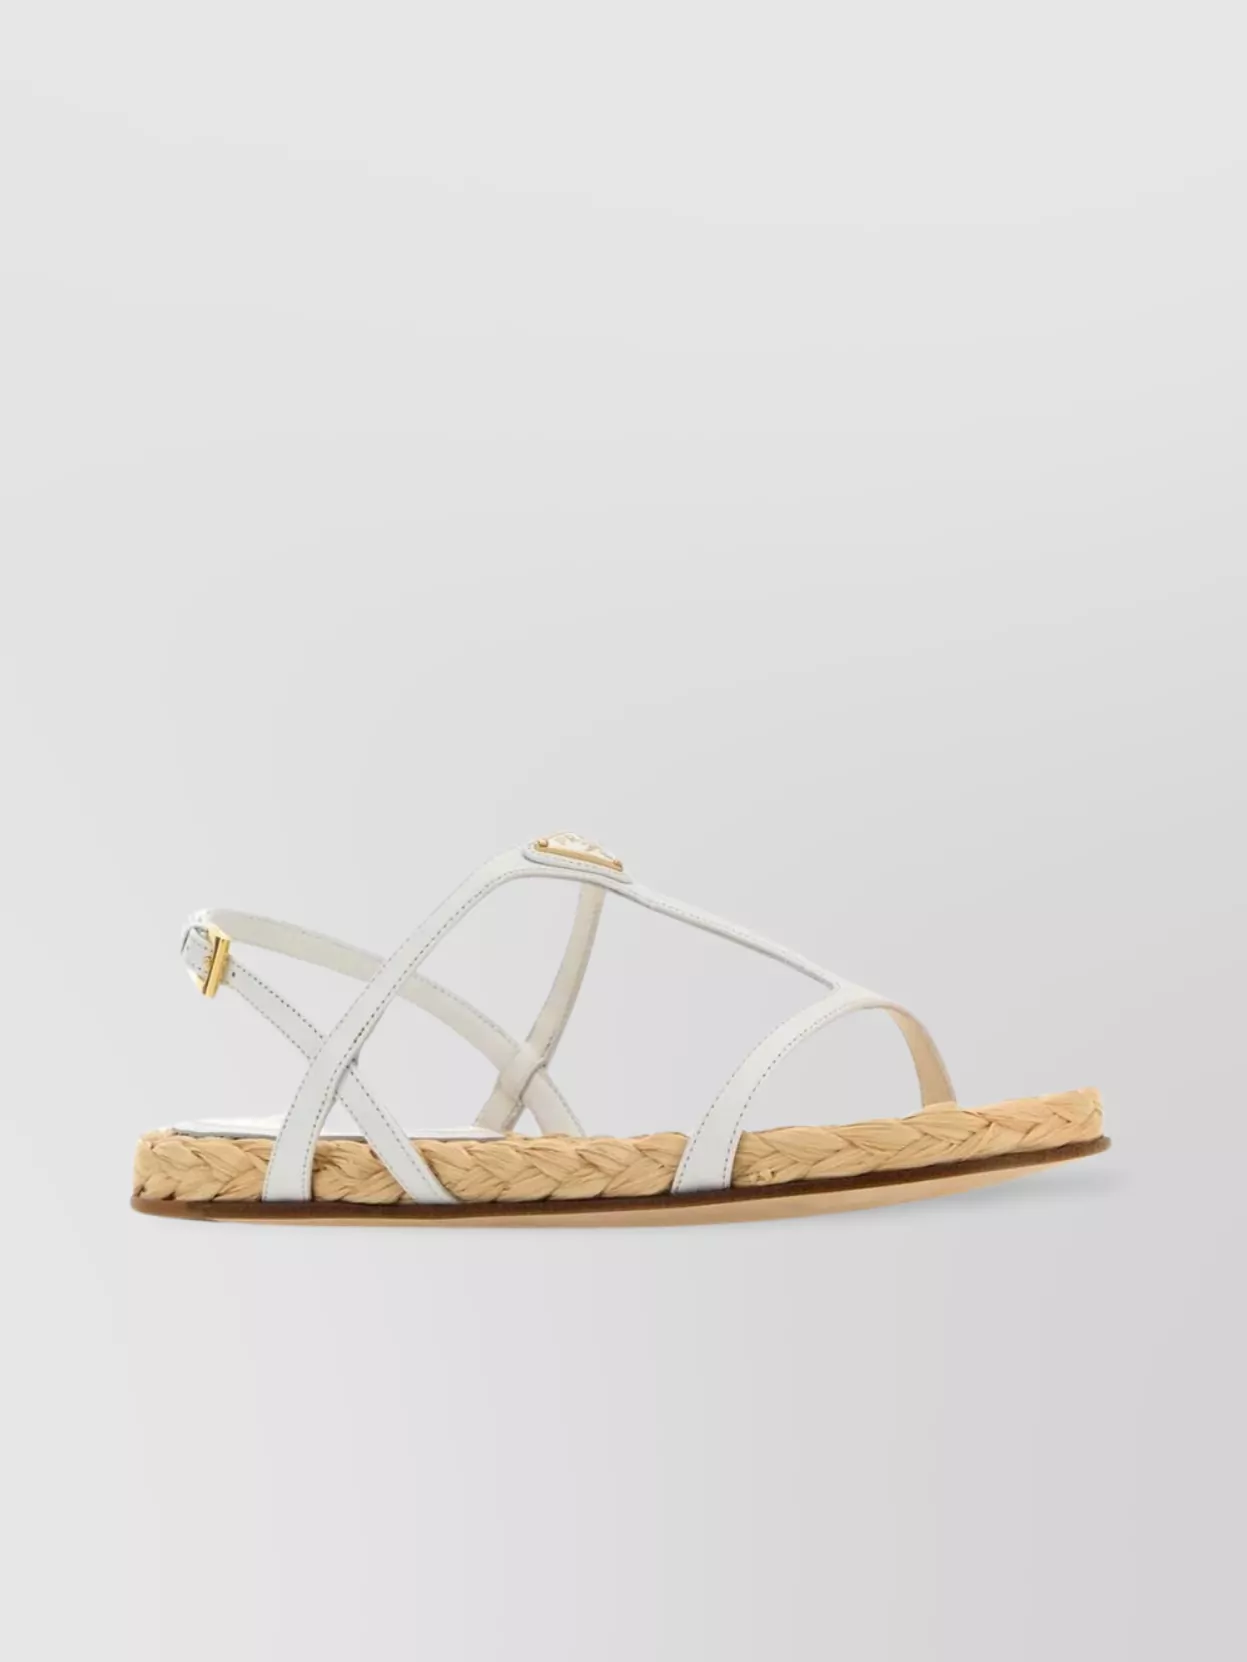 Shop Prada Leather Sandals With Braided Jute Sole